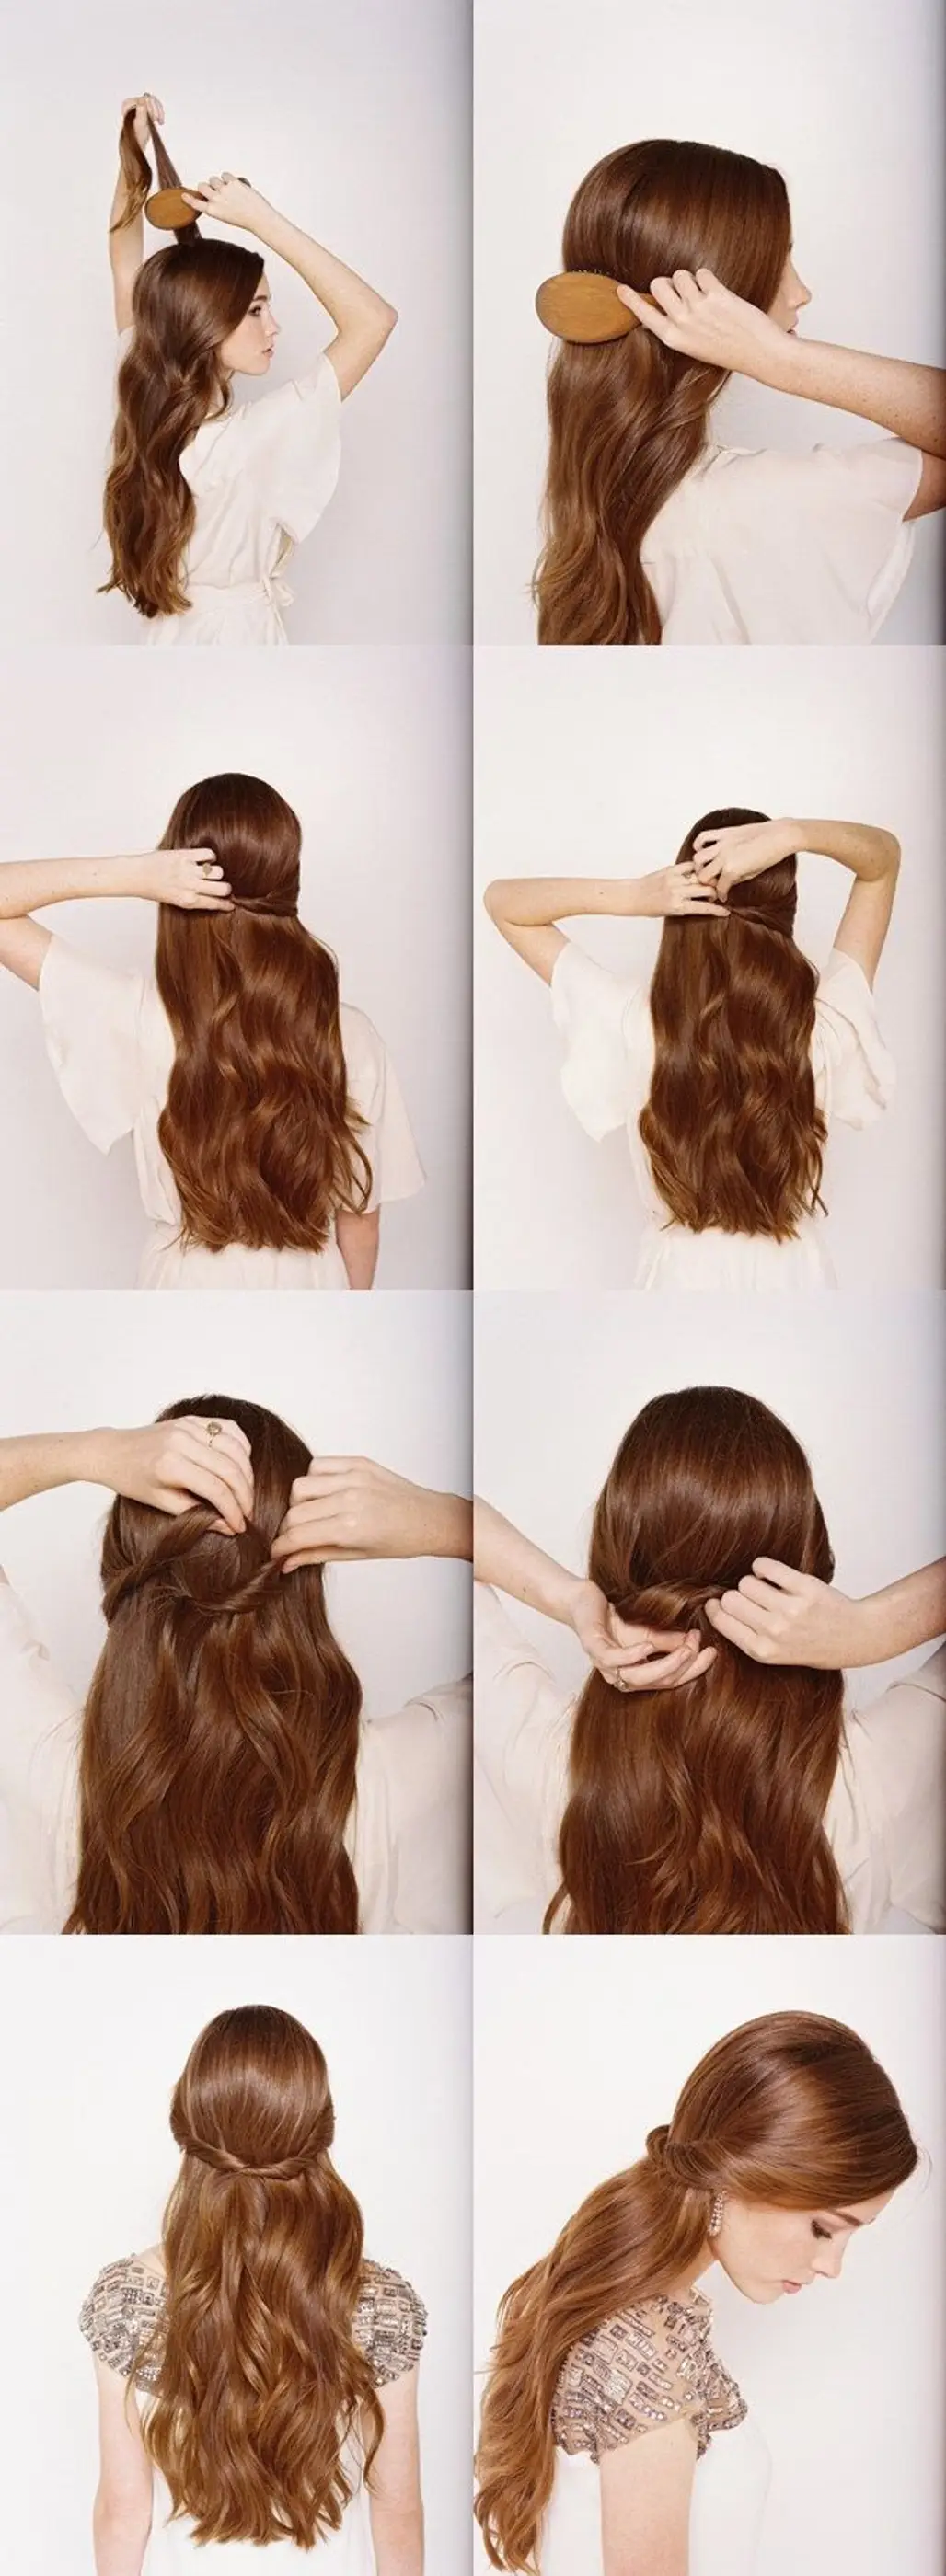 hair,brown,clothing,hairstyle,fashion accessory,